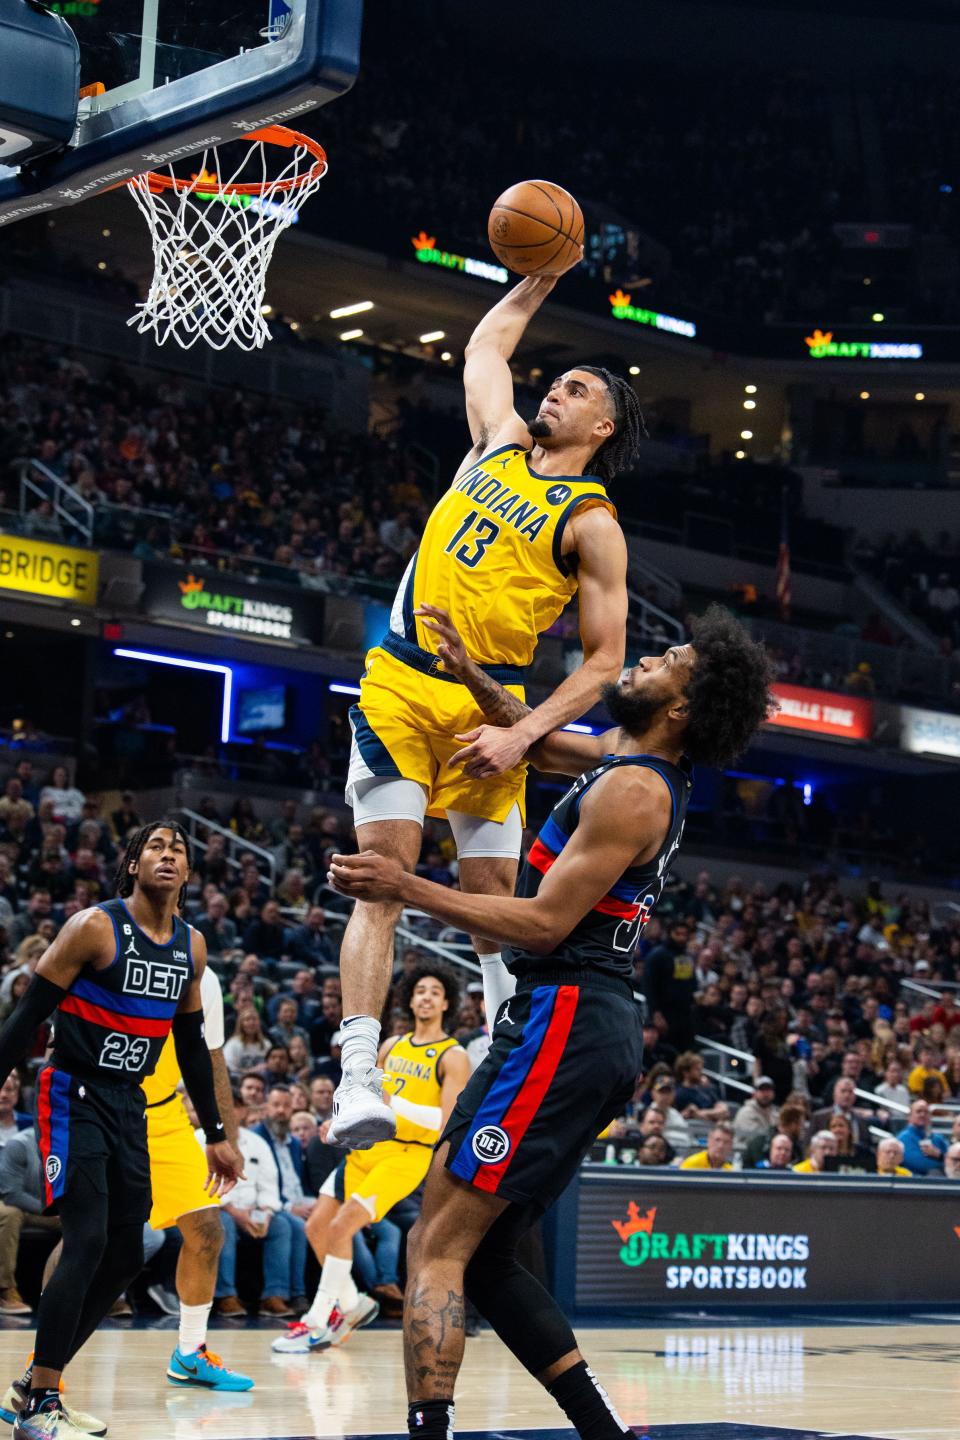 Apr 7, 2023; Indianapolis, Indiana, USA; Indiana Pacers forward Jordan Nwora (13) shoots the ball while Detroit Pistons forward Marvin Bagley III (35) defends in the first quarter at Gainbridge Fieldhouse. Mandatory Credit: Trevor Ruszkowski-USA TODAY Sports